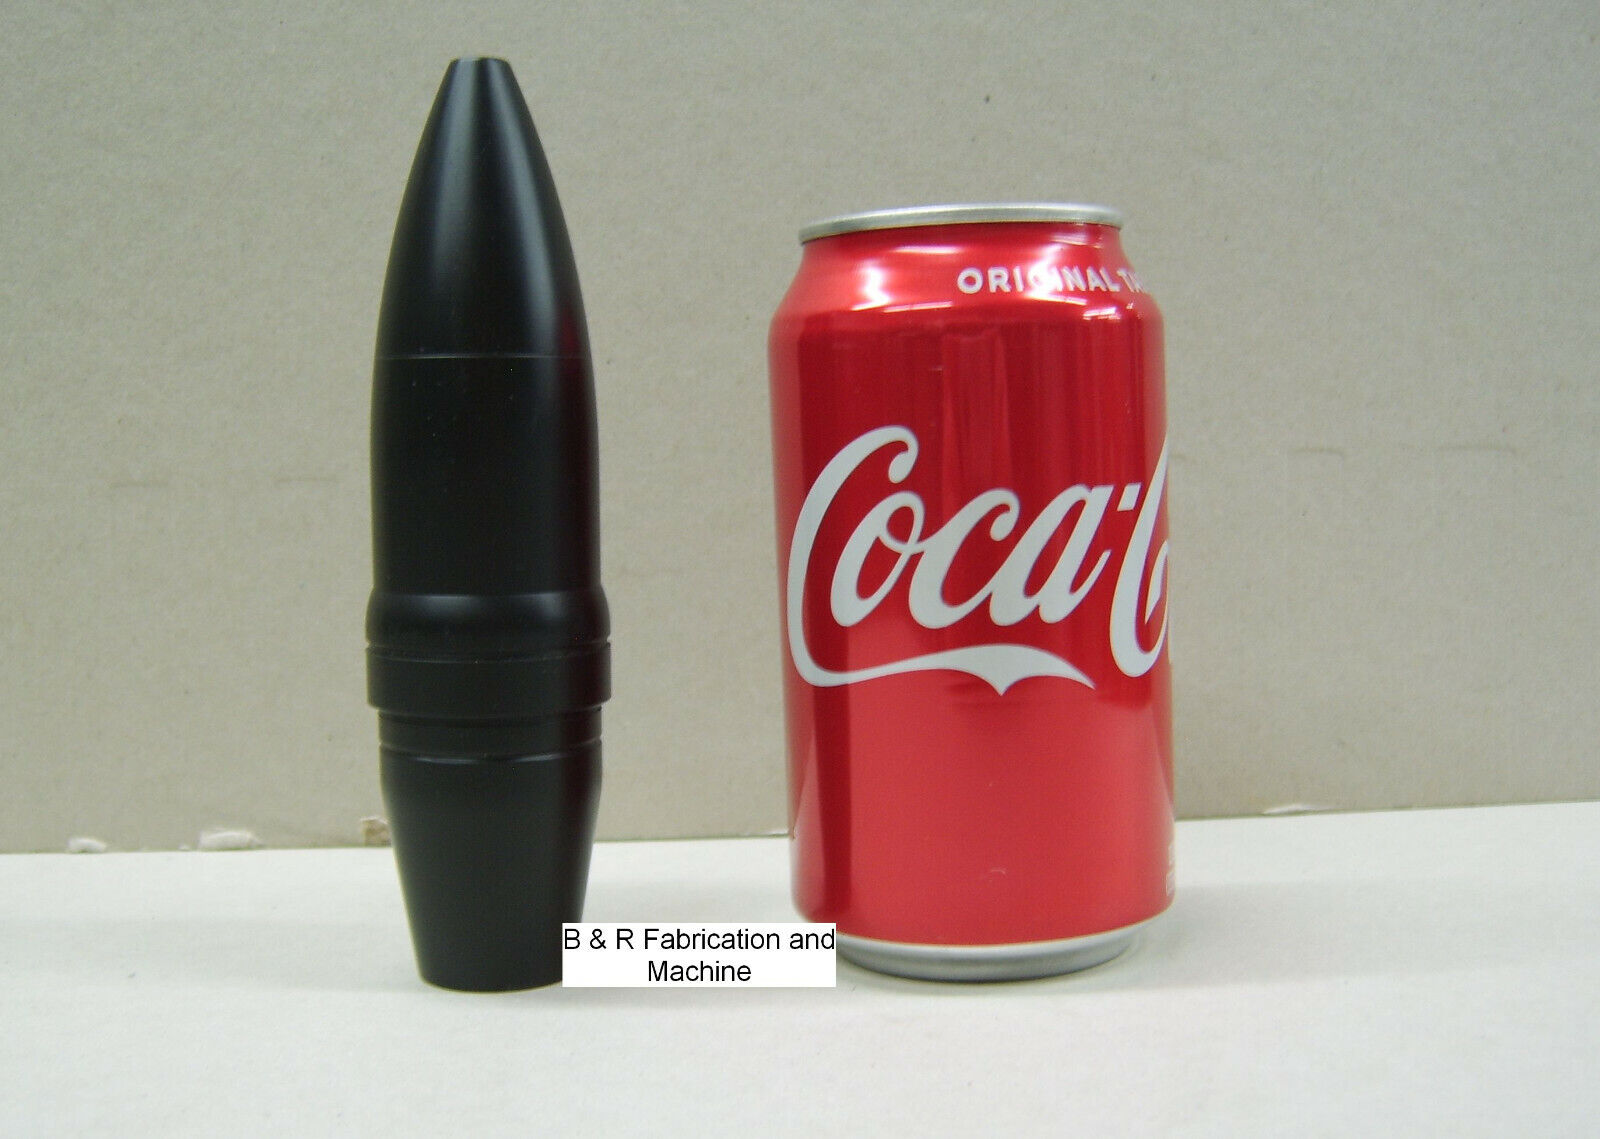 37mm Replica projectile, machined solid, Black Plastic mm54 Airacobra Kingcobra